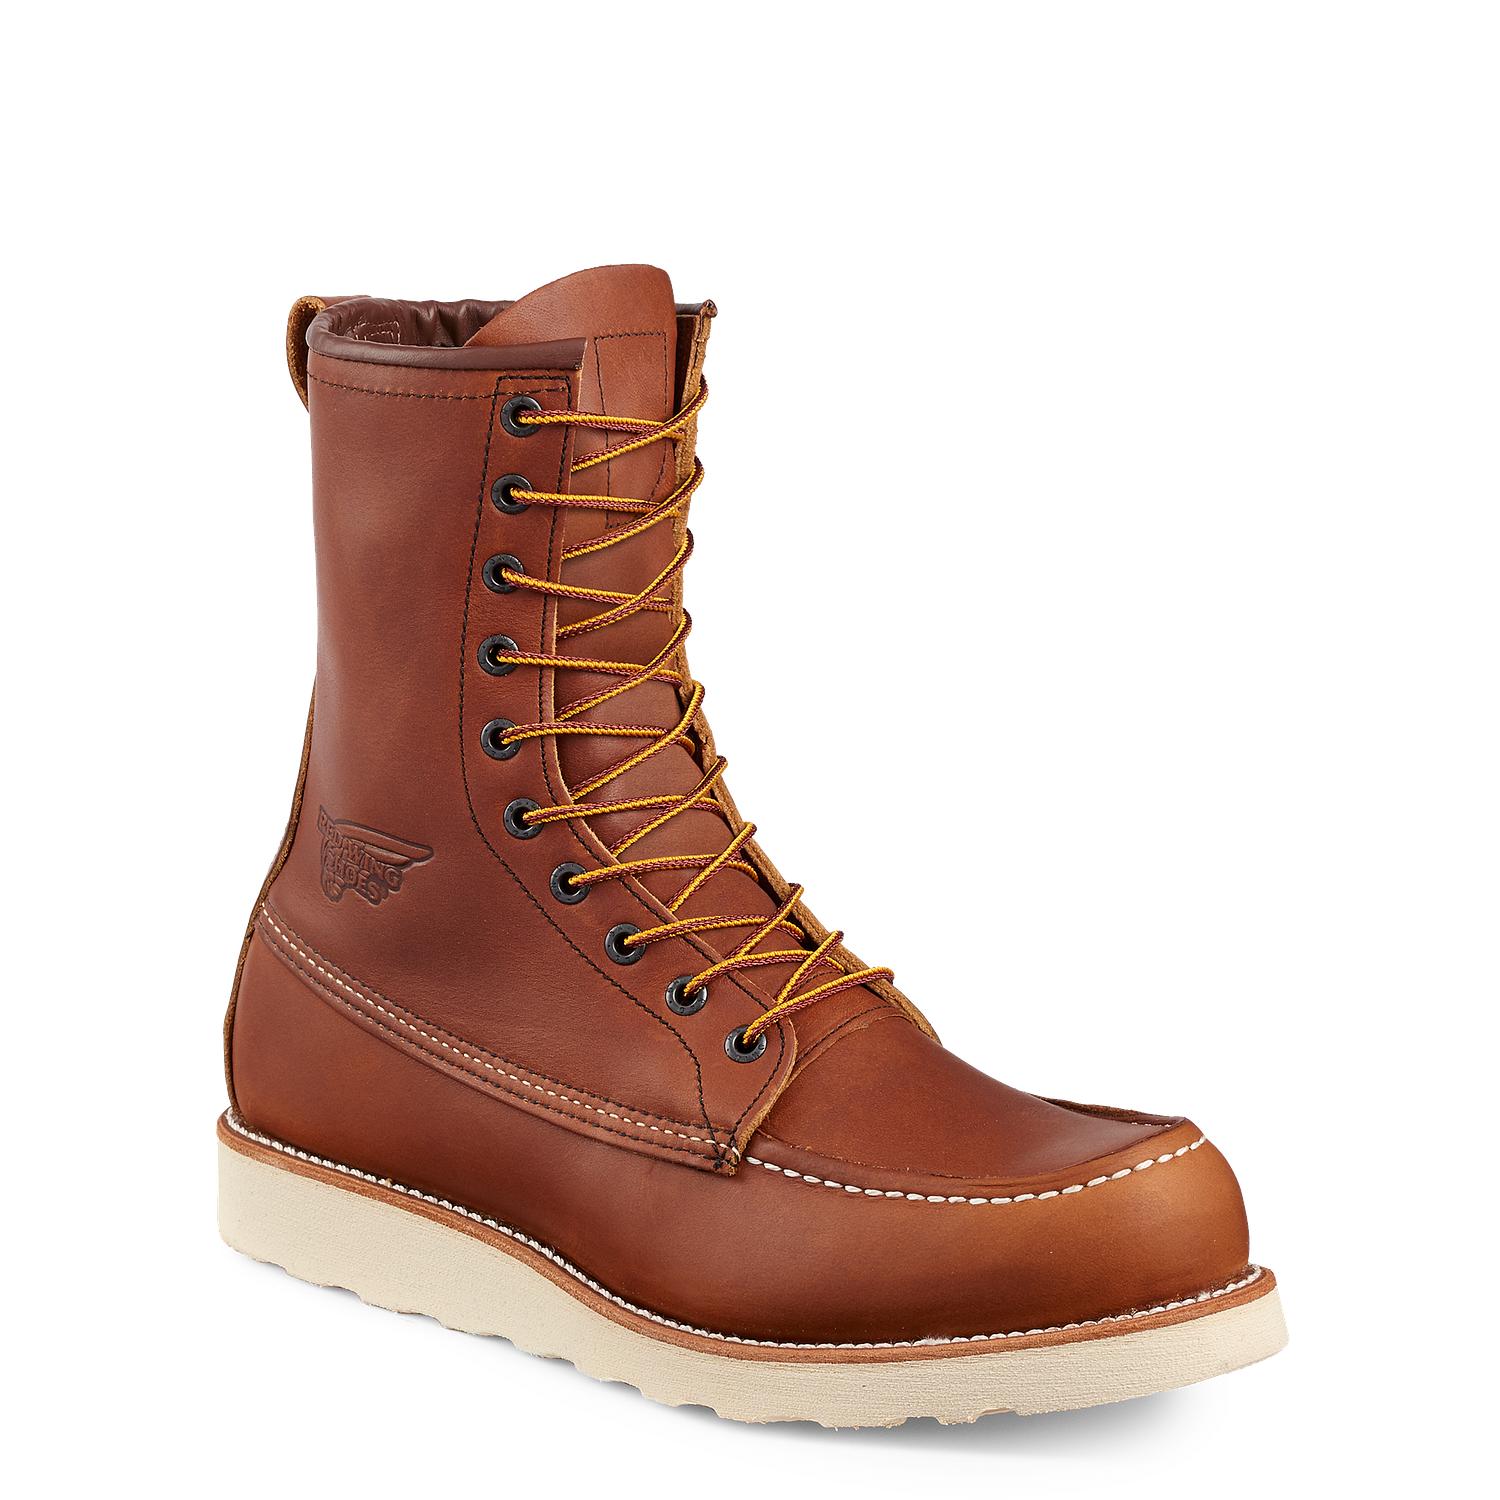 Men's 10877 Traction Tred 8-inch Boot | Red Wing Work Boots